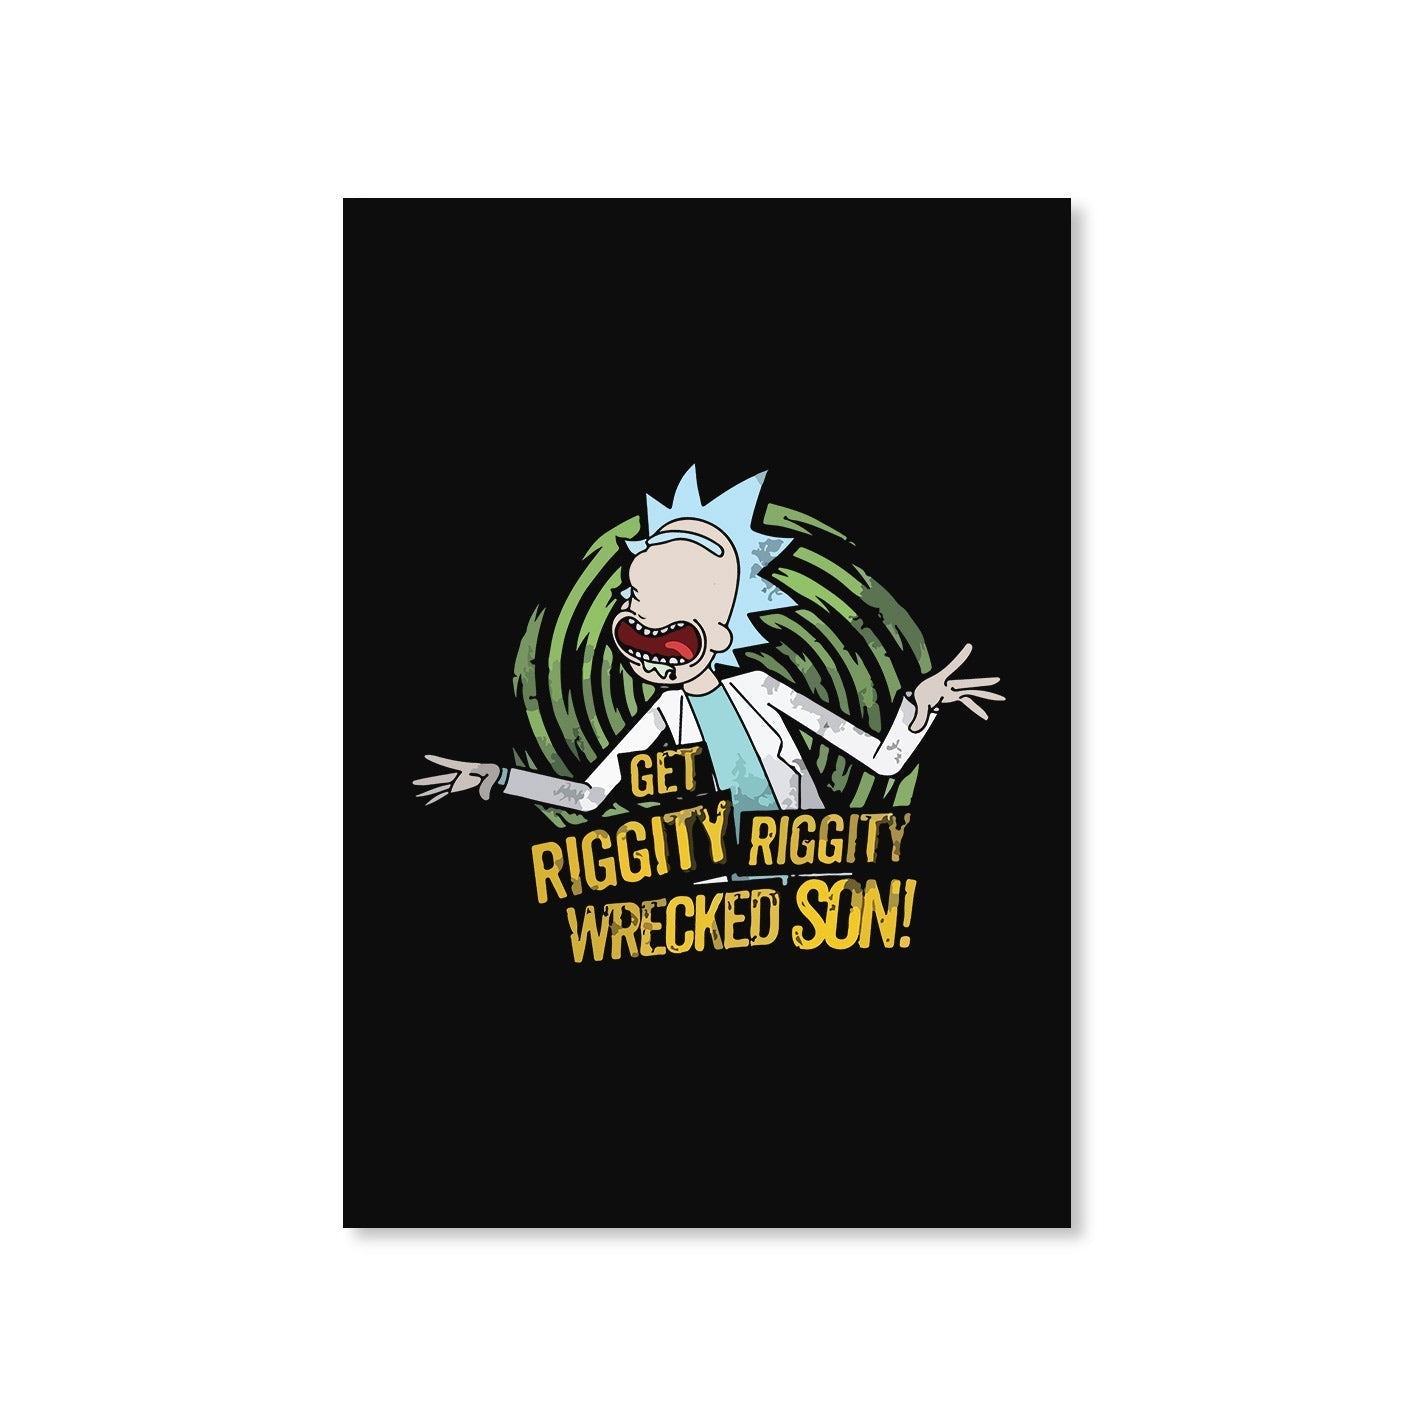 rick and morty riggity poster wall art buy online united states of america usa the banyan tee tbt a4 rick and morty online summer beth mr meeseeks jerry quote vector art clothing accessories merchandise